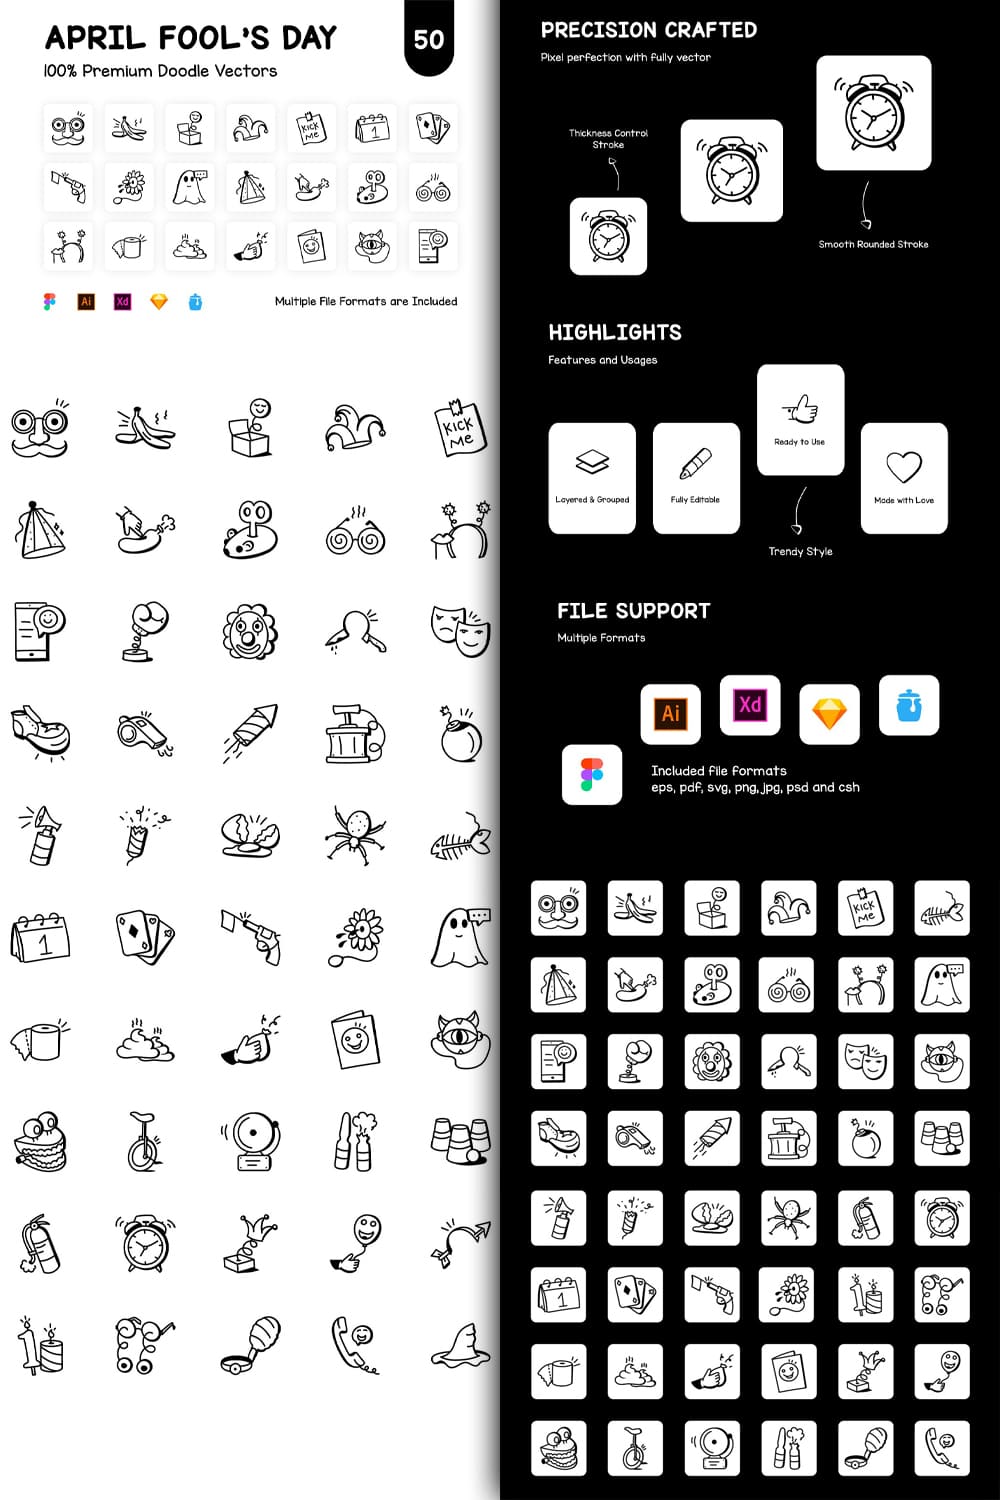 50 Doodle April Fool’s Day Icons - Pinterest.